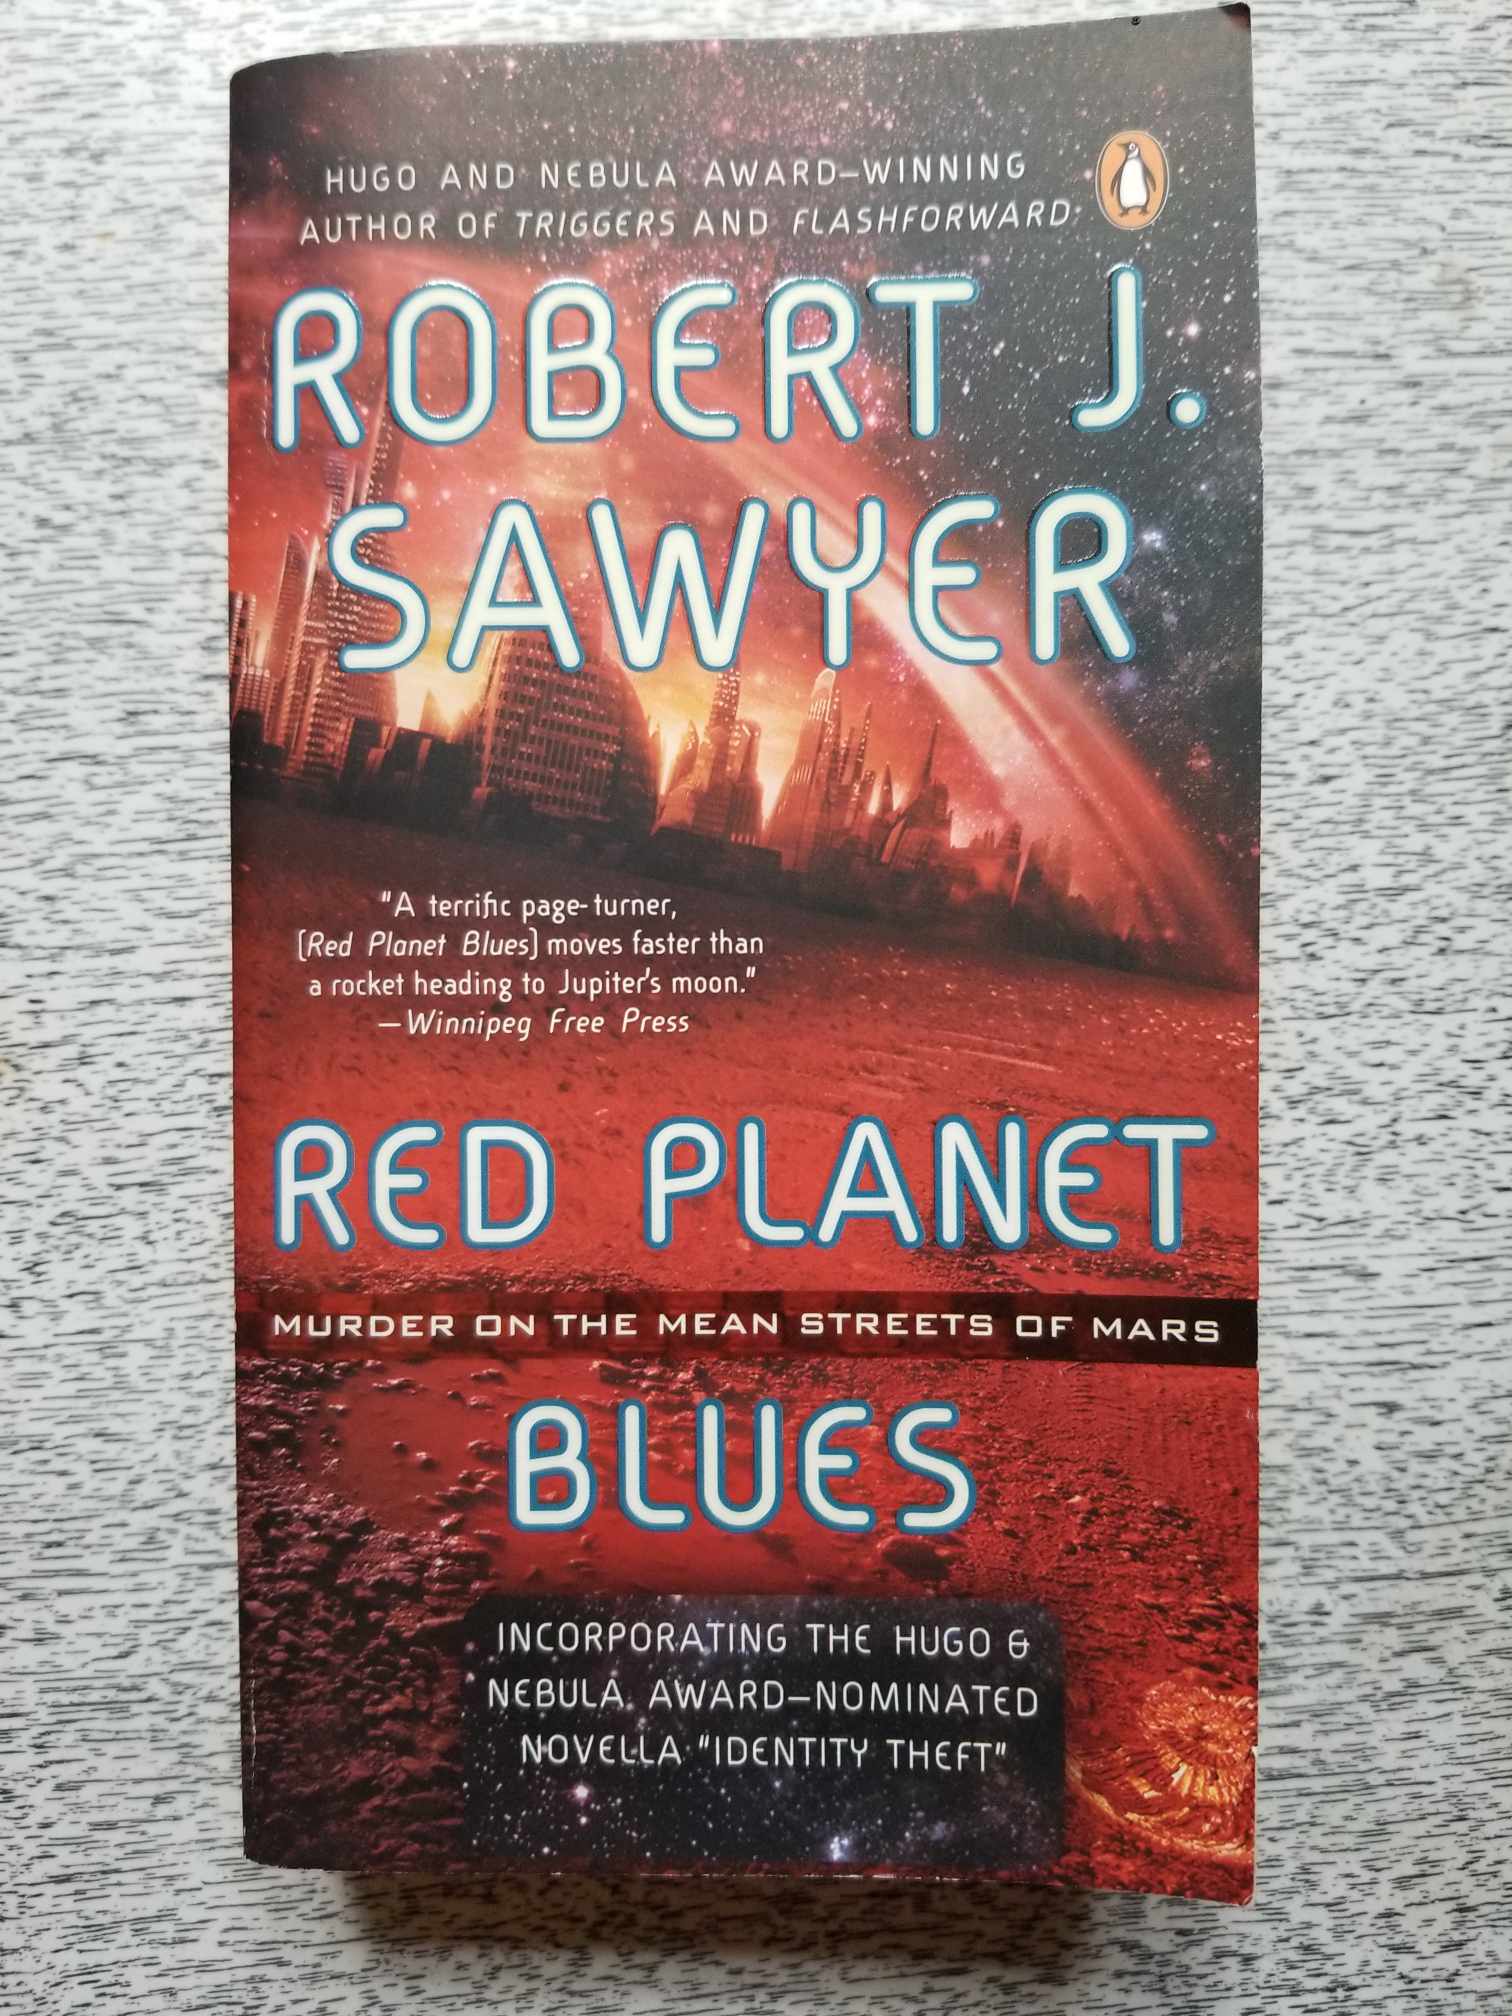 Red Planet Blues by Robert J. Sawyer